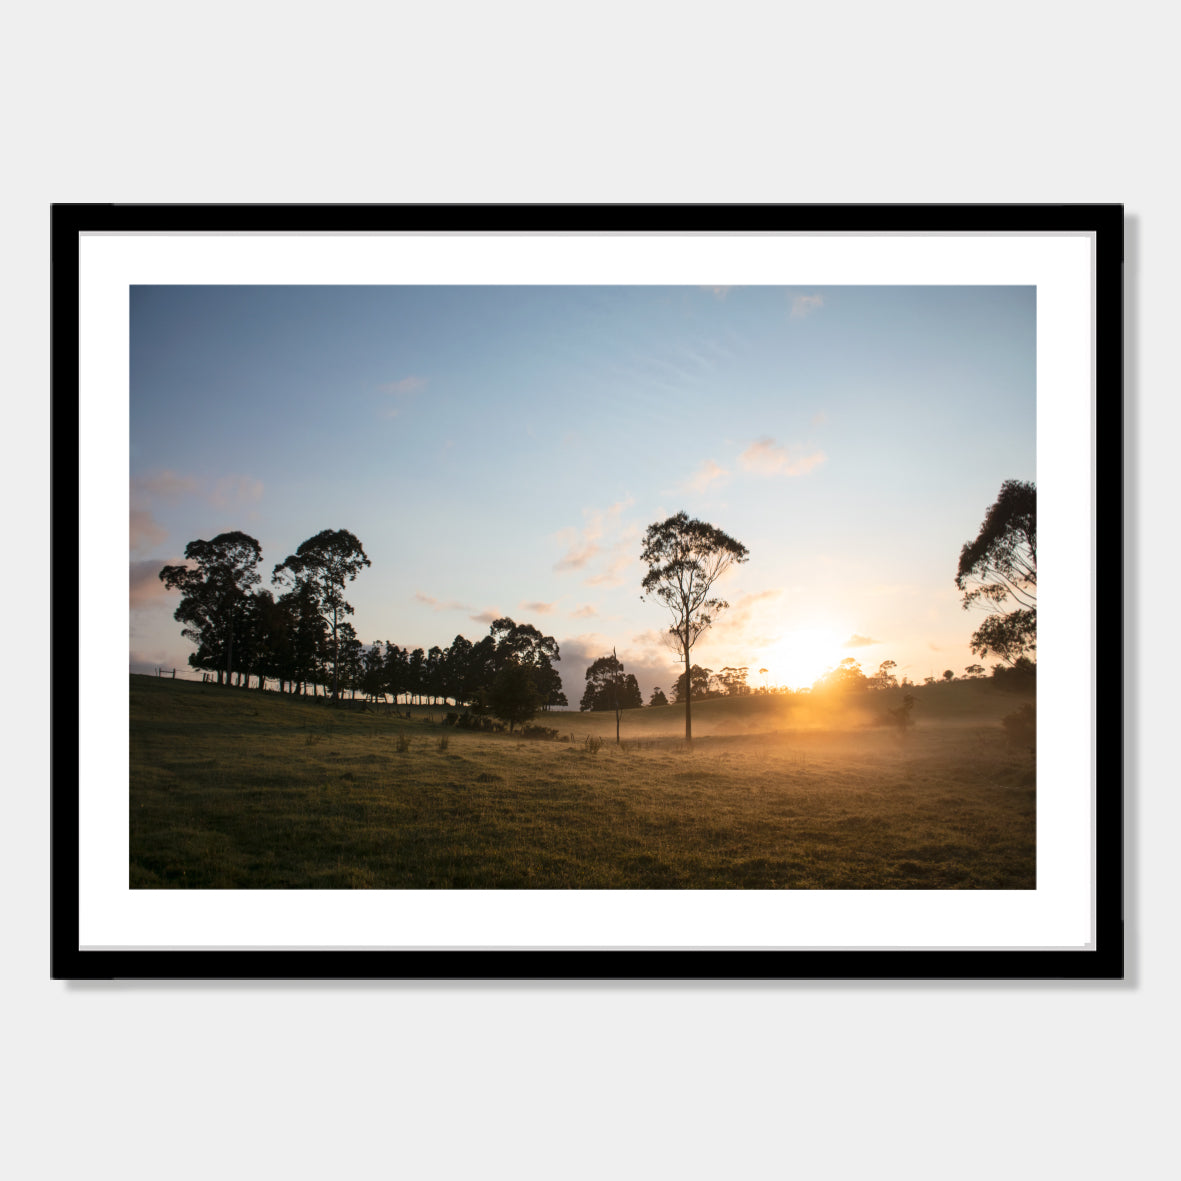 Photographic art print of sunrise in Northland, New Zealand by Chris Starkey. Printed in New Zealand by endemicworld framed in black.